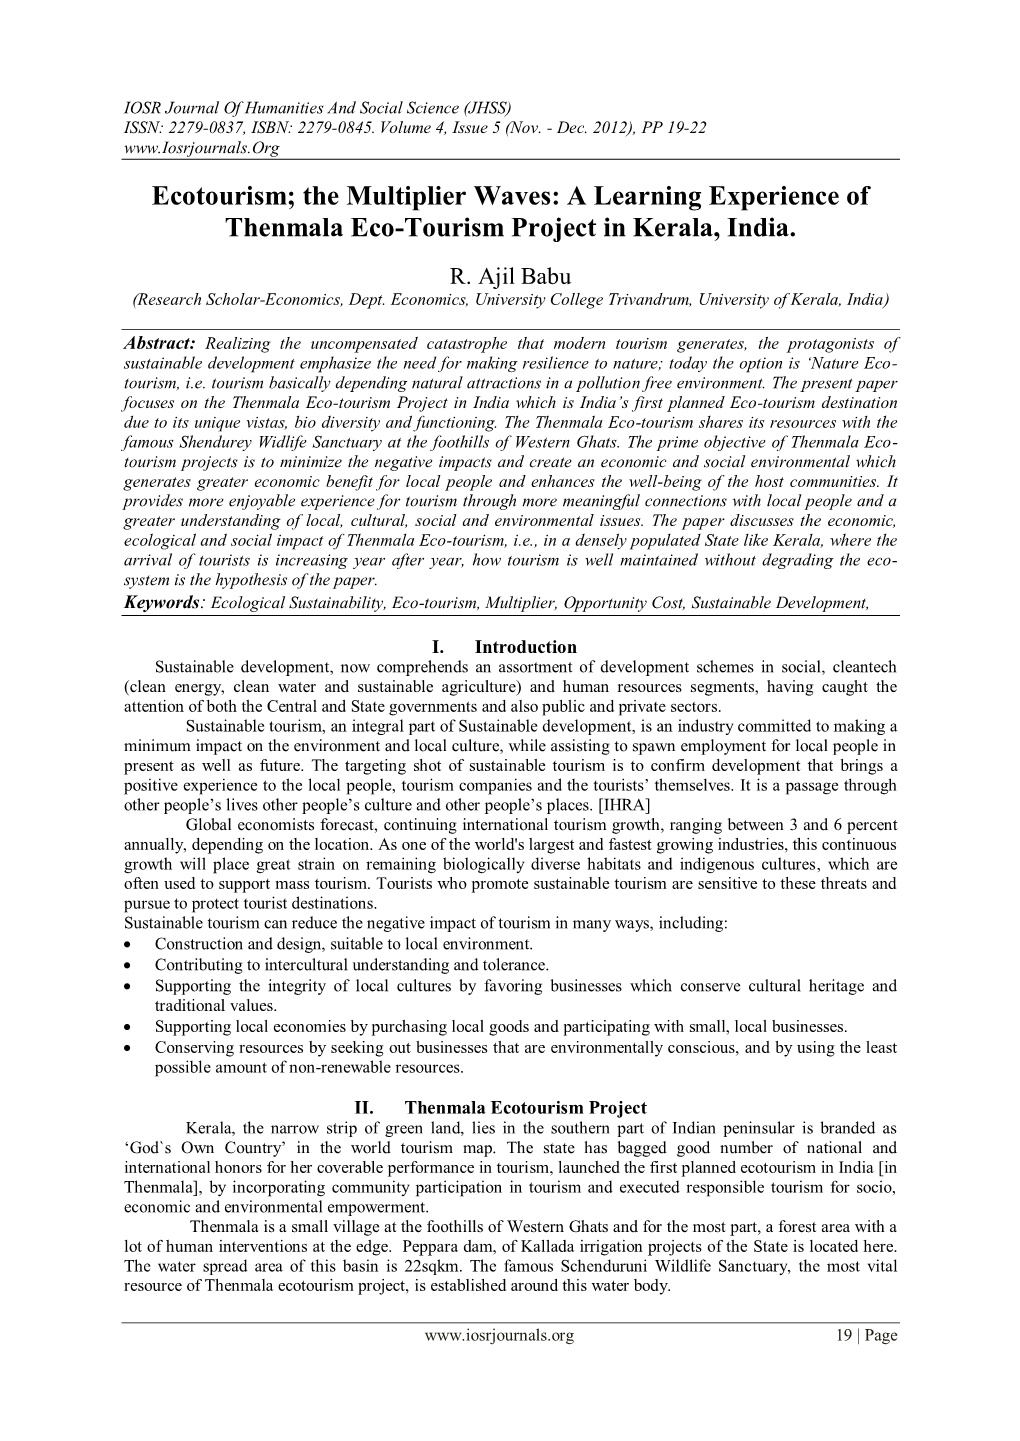 A Learning Experience of Thenmala Eco-Tourism Project in Kerala, India